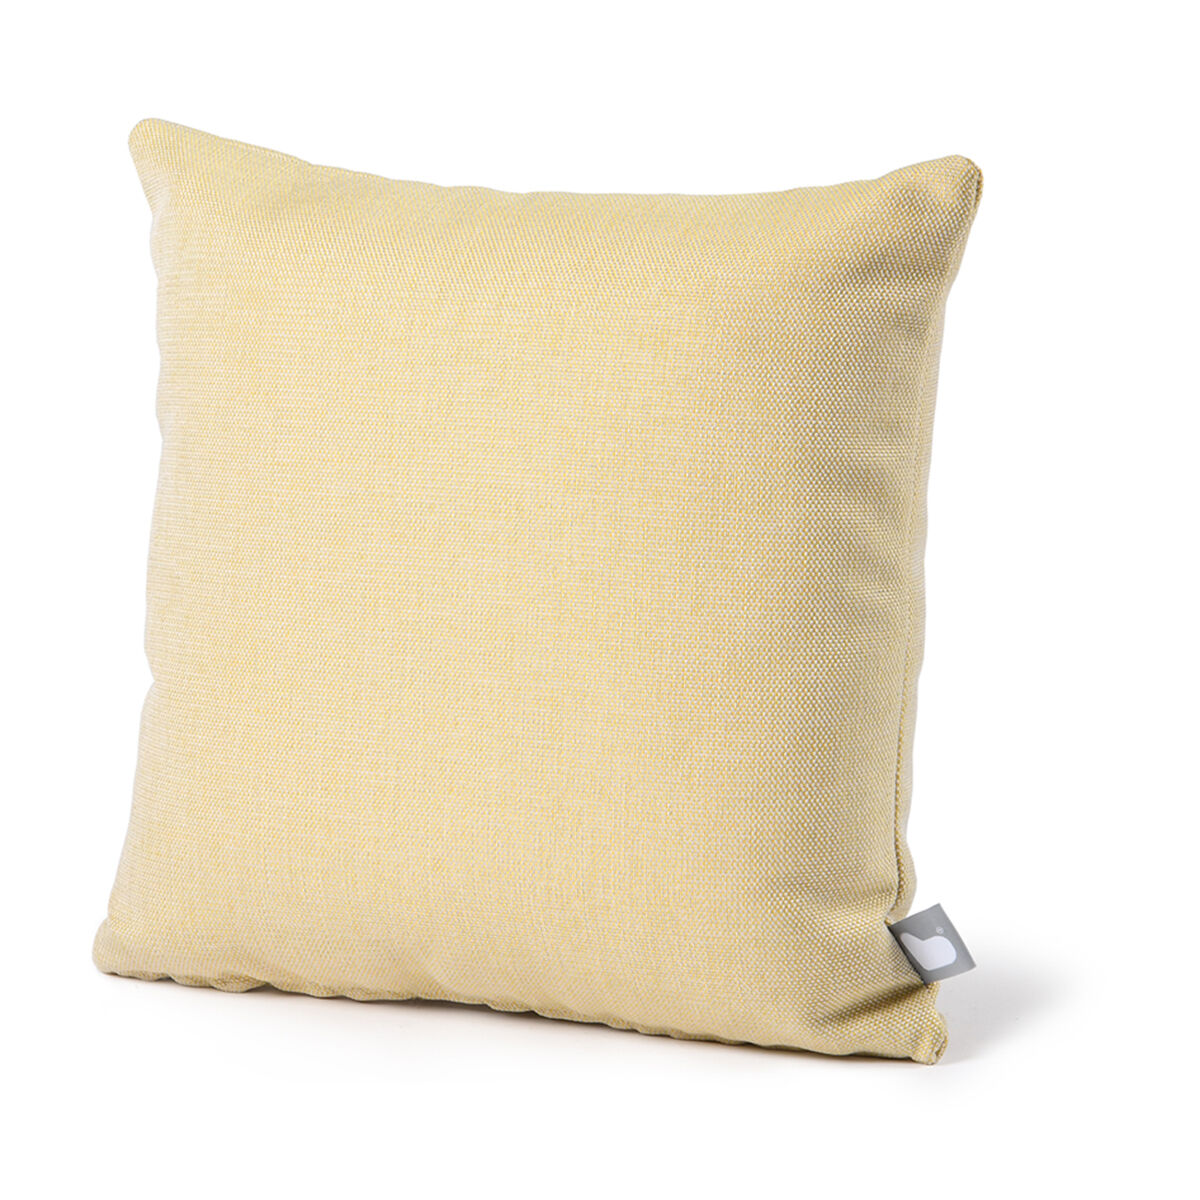 Maze - Pair of Outdoor Scatter Cushion (43x43cm) - Hermes Yellow product image